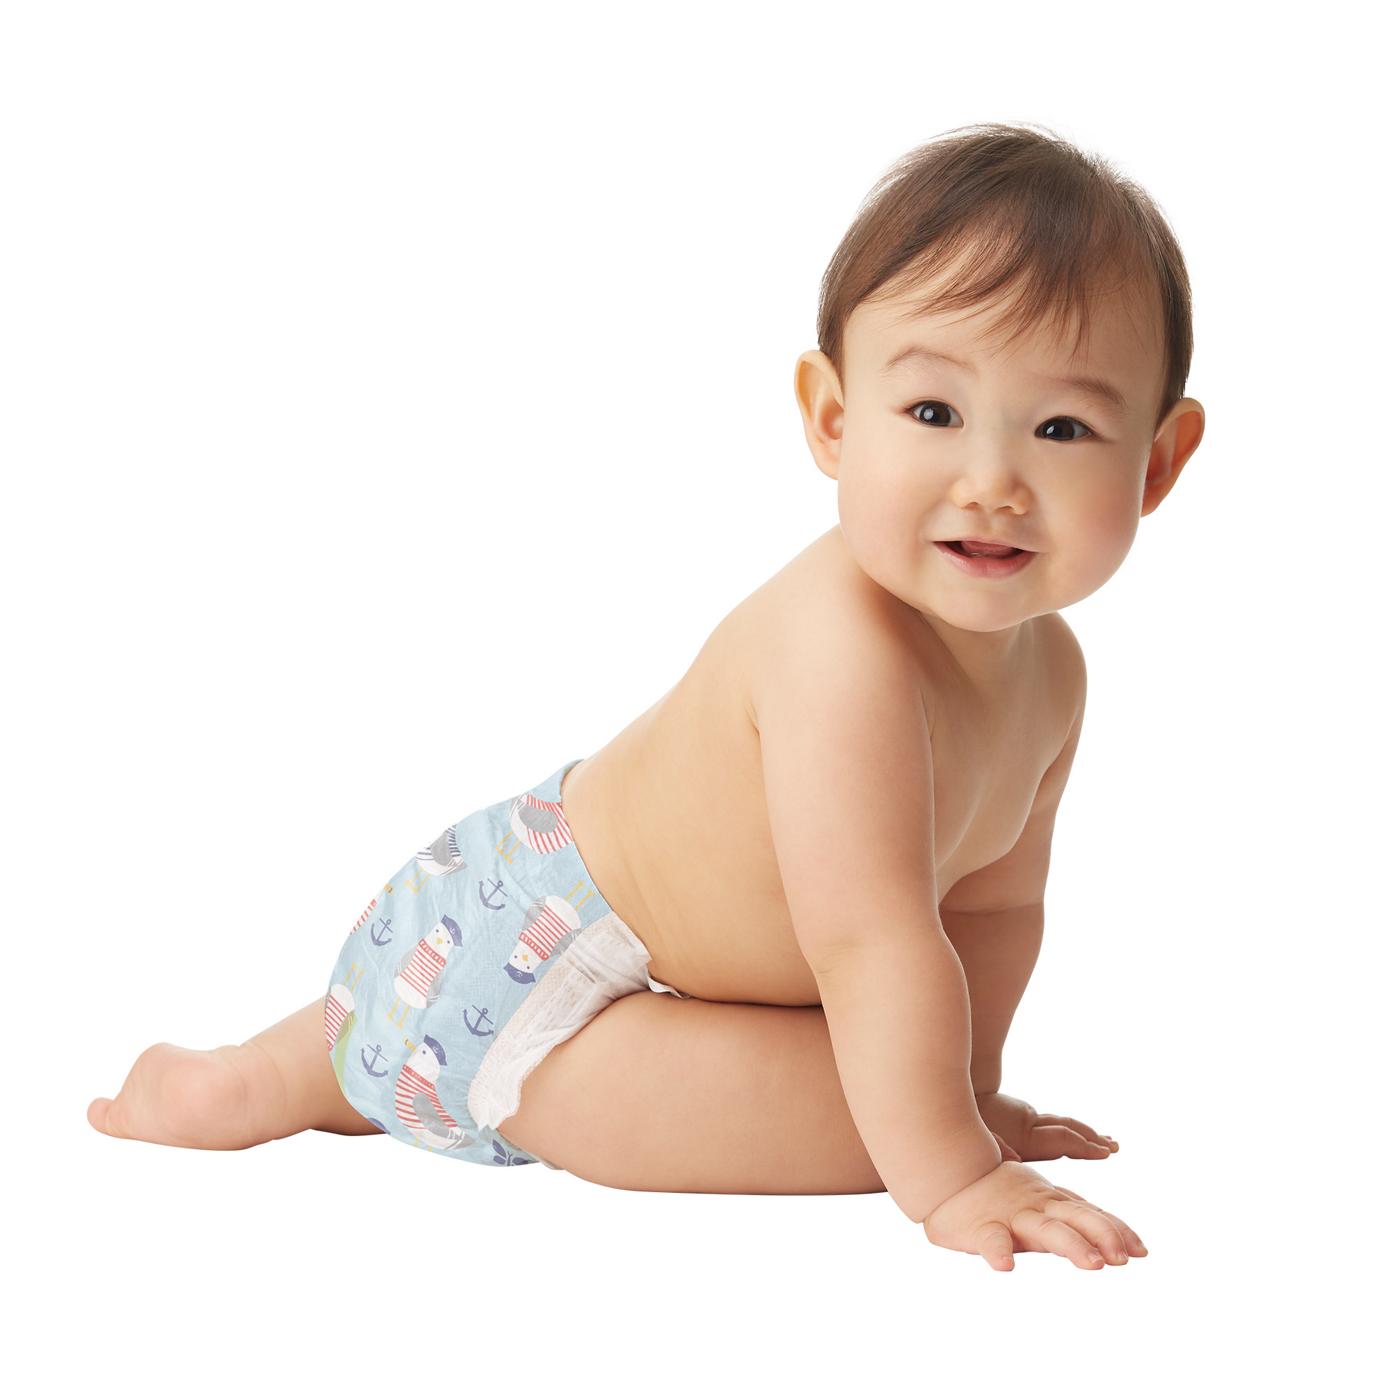 The Honest Company Clean Conscious Diapers Club Box - Size 3, 2 Print Pack; image 7 of 9